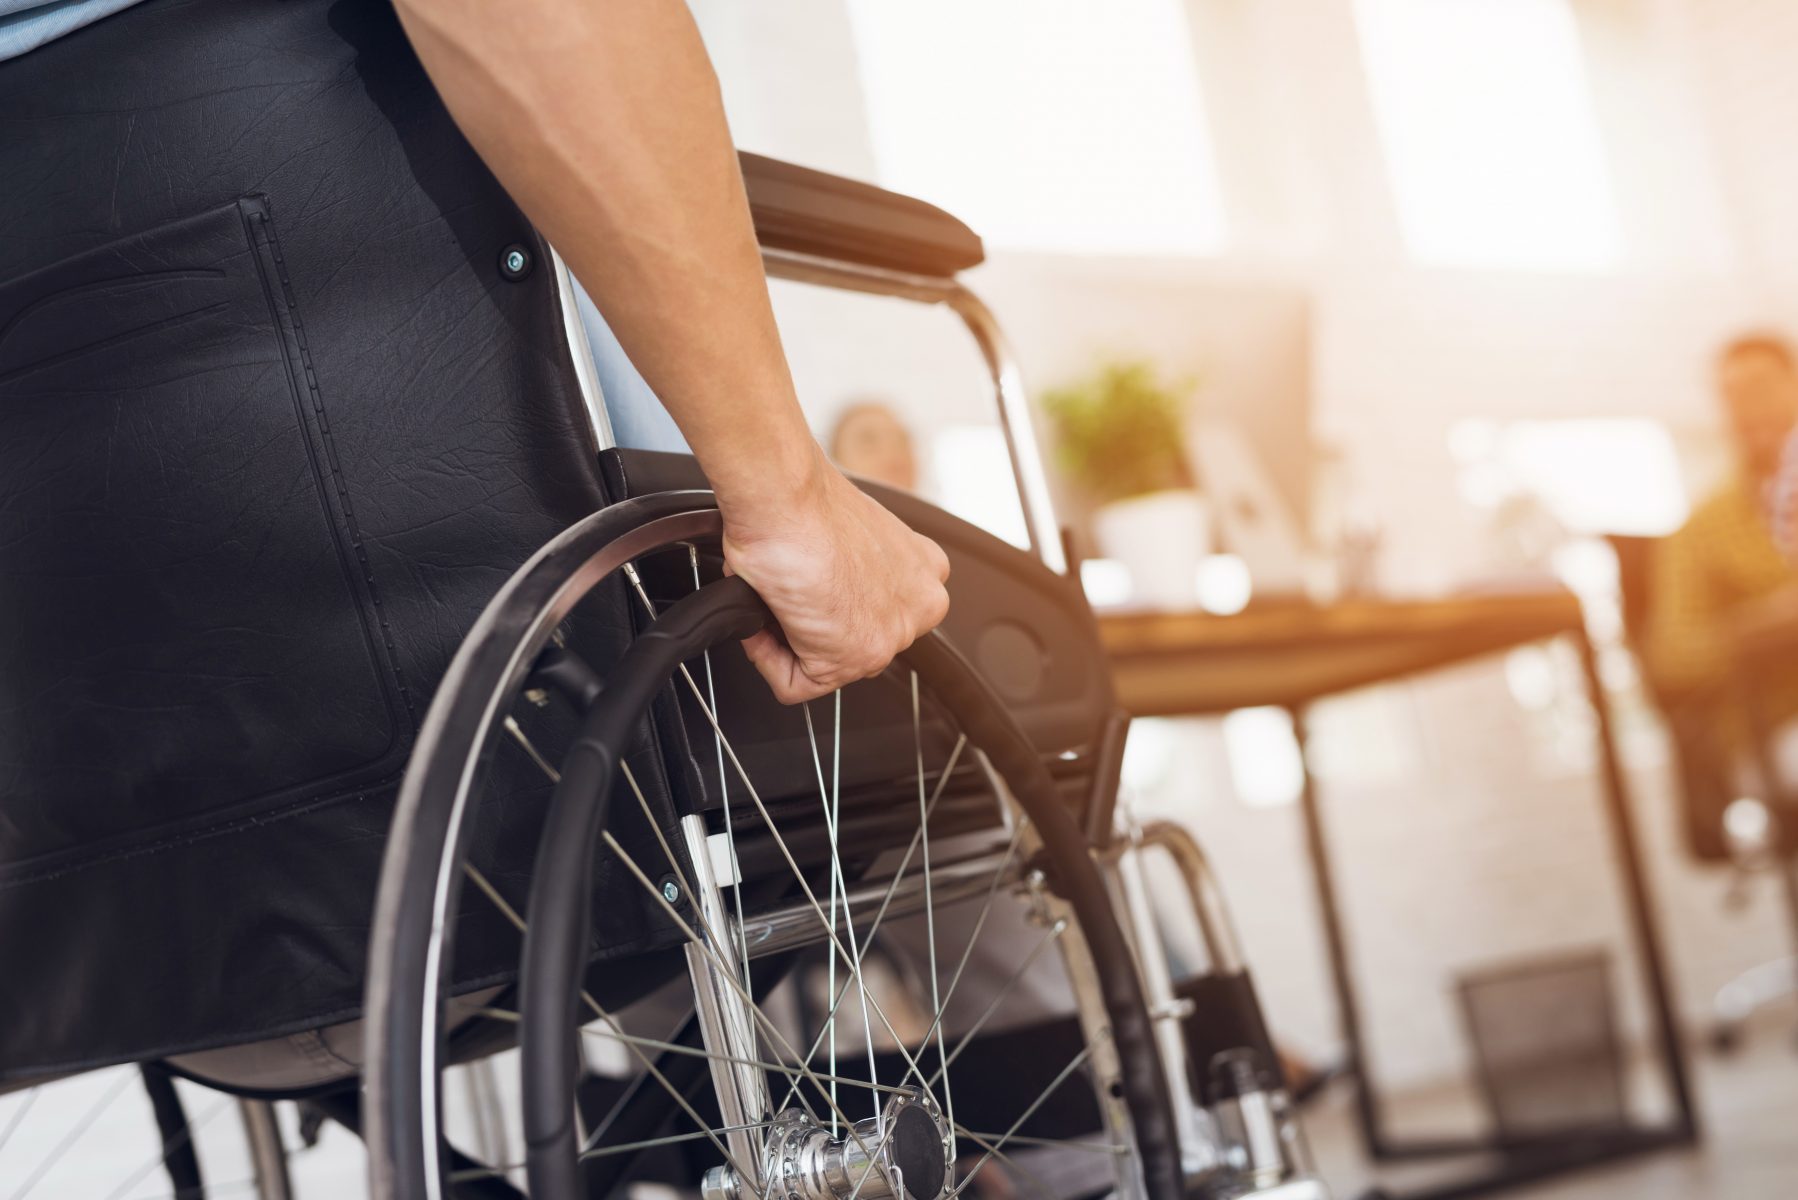 Can an Employer Ask What My Disability Is?